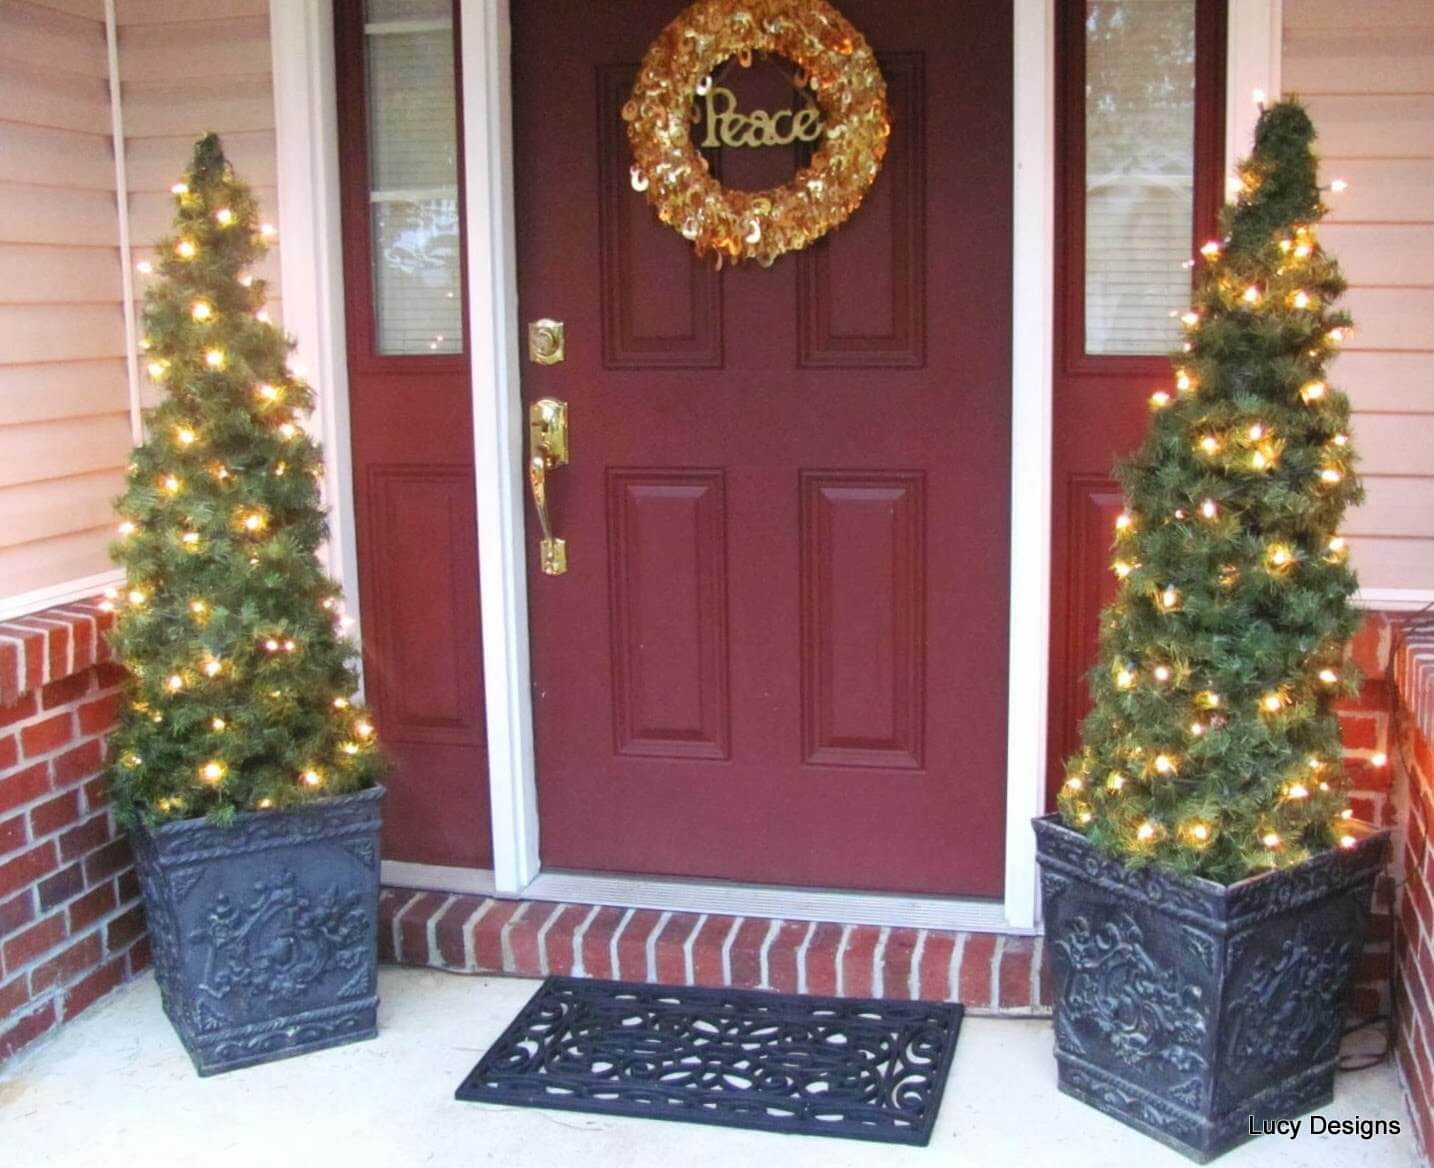 Porch Christmas Tree
 22 Best Outdoor Christmas Tree Decorations and Designs for